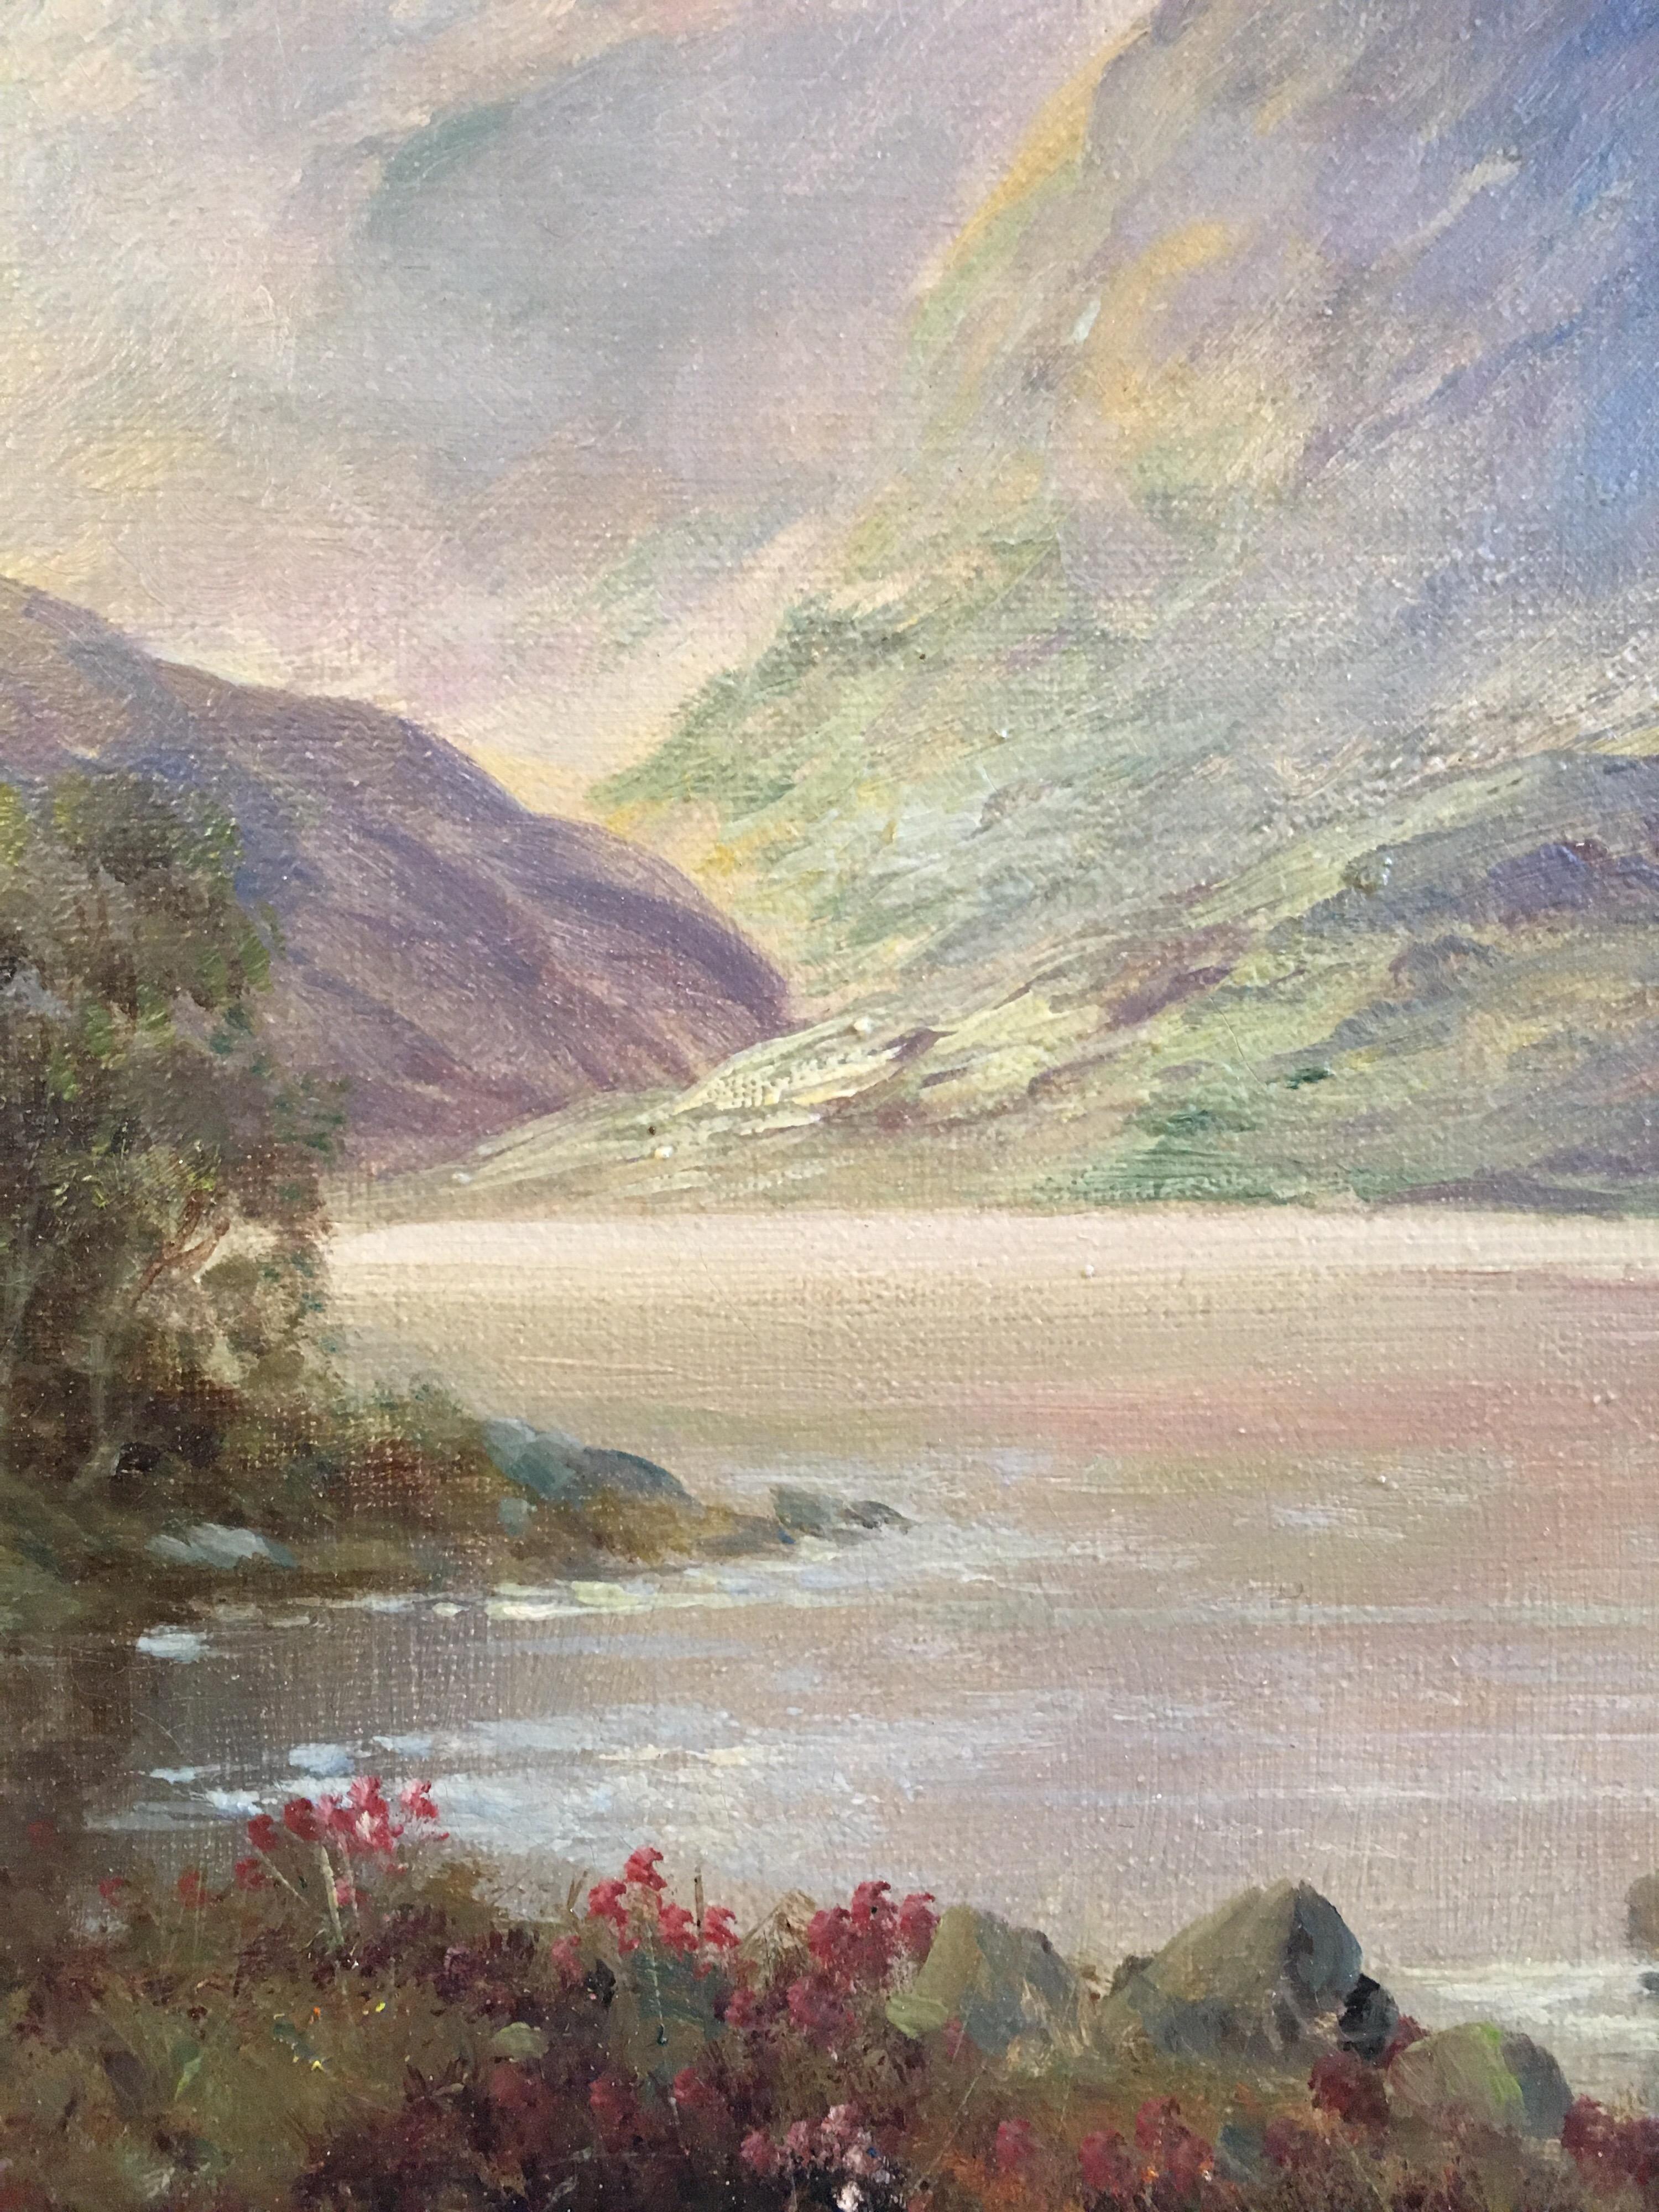 Loch Katrine, Antique Scottish Oil Painting, Signed - Gray Landscape Painting by Francis E. Jamieson